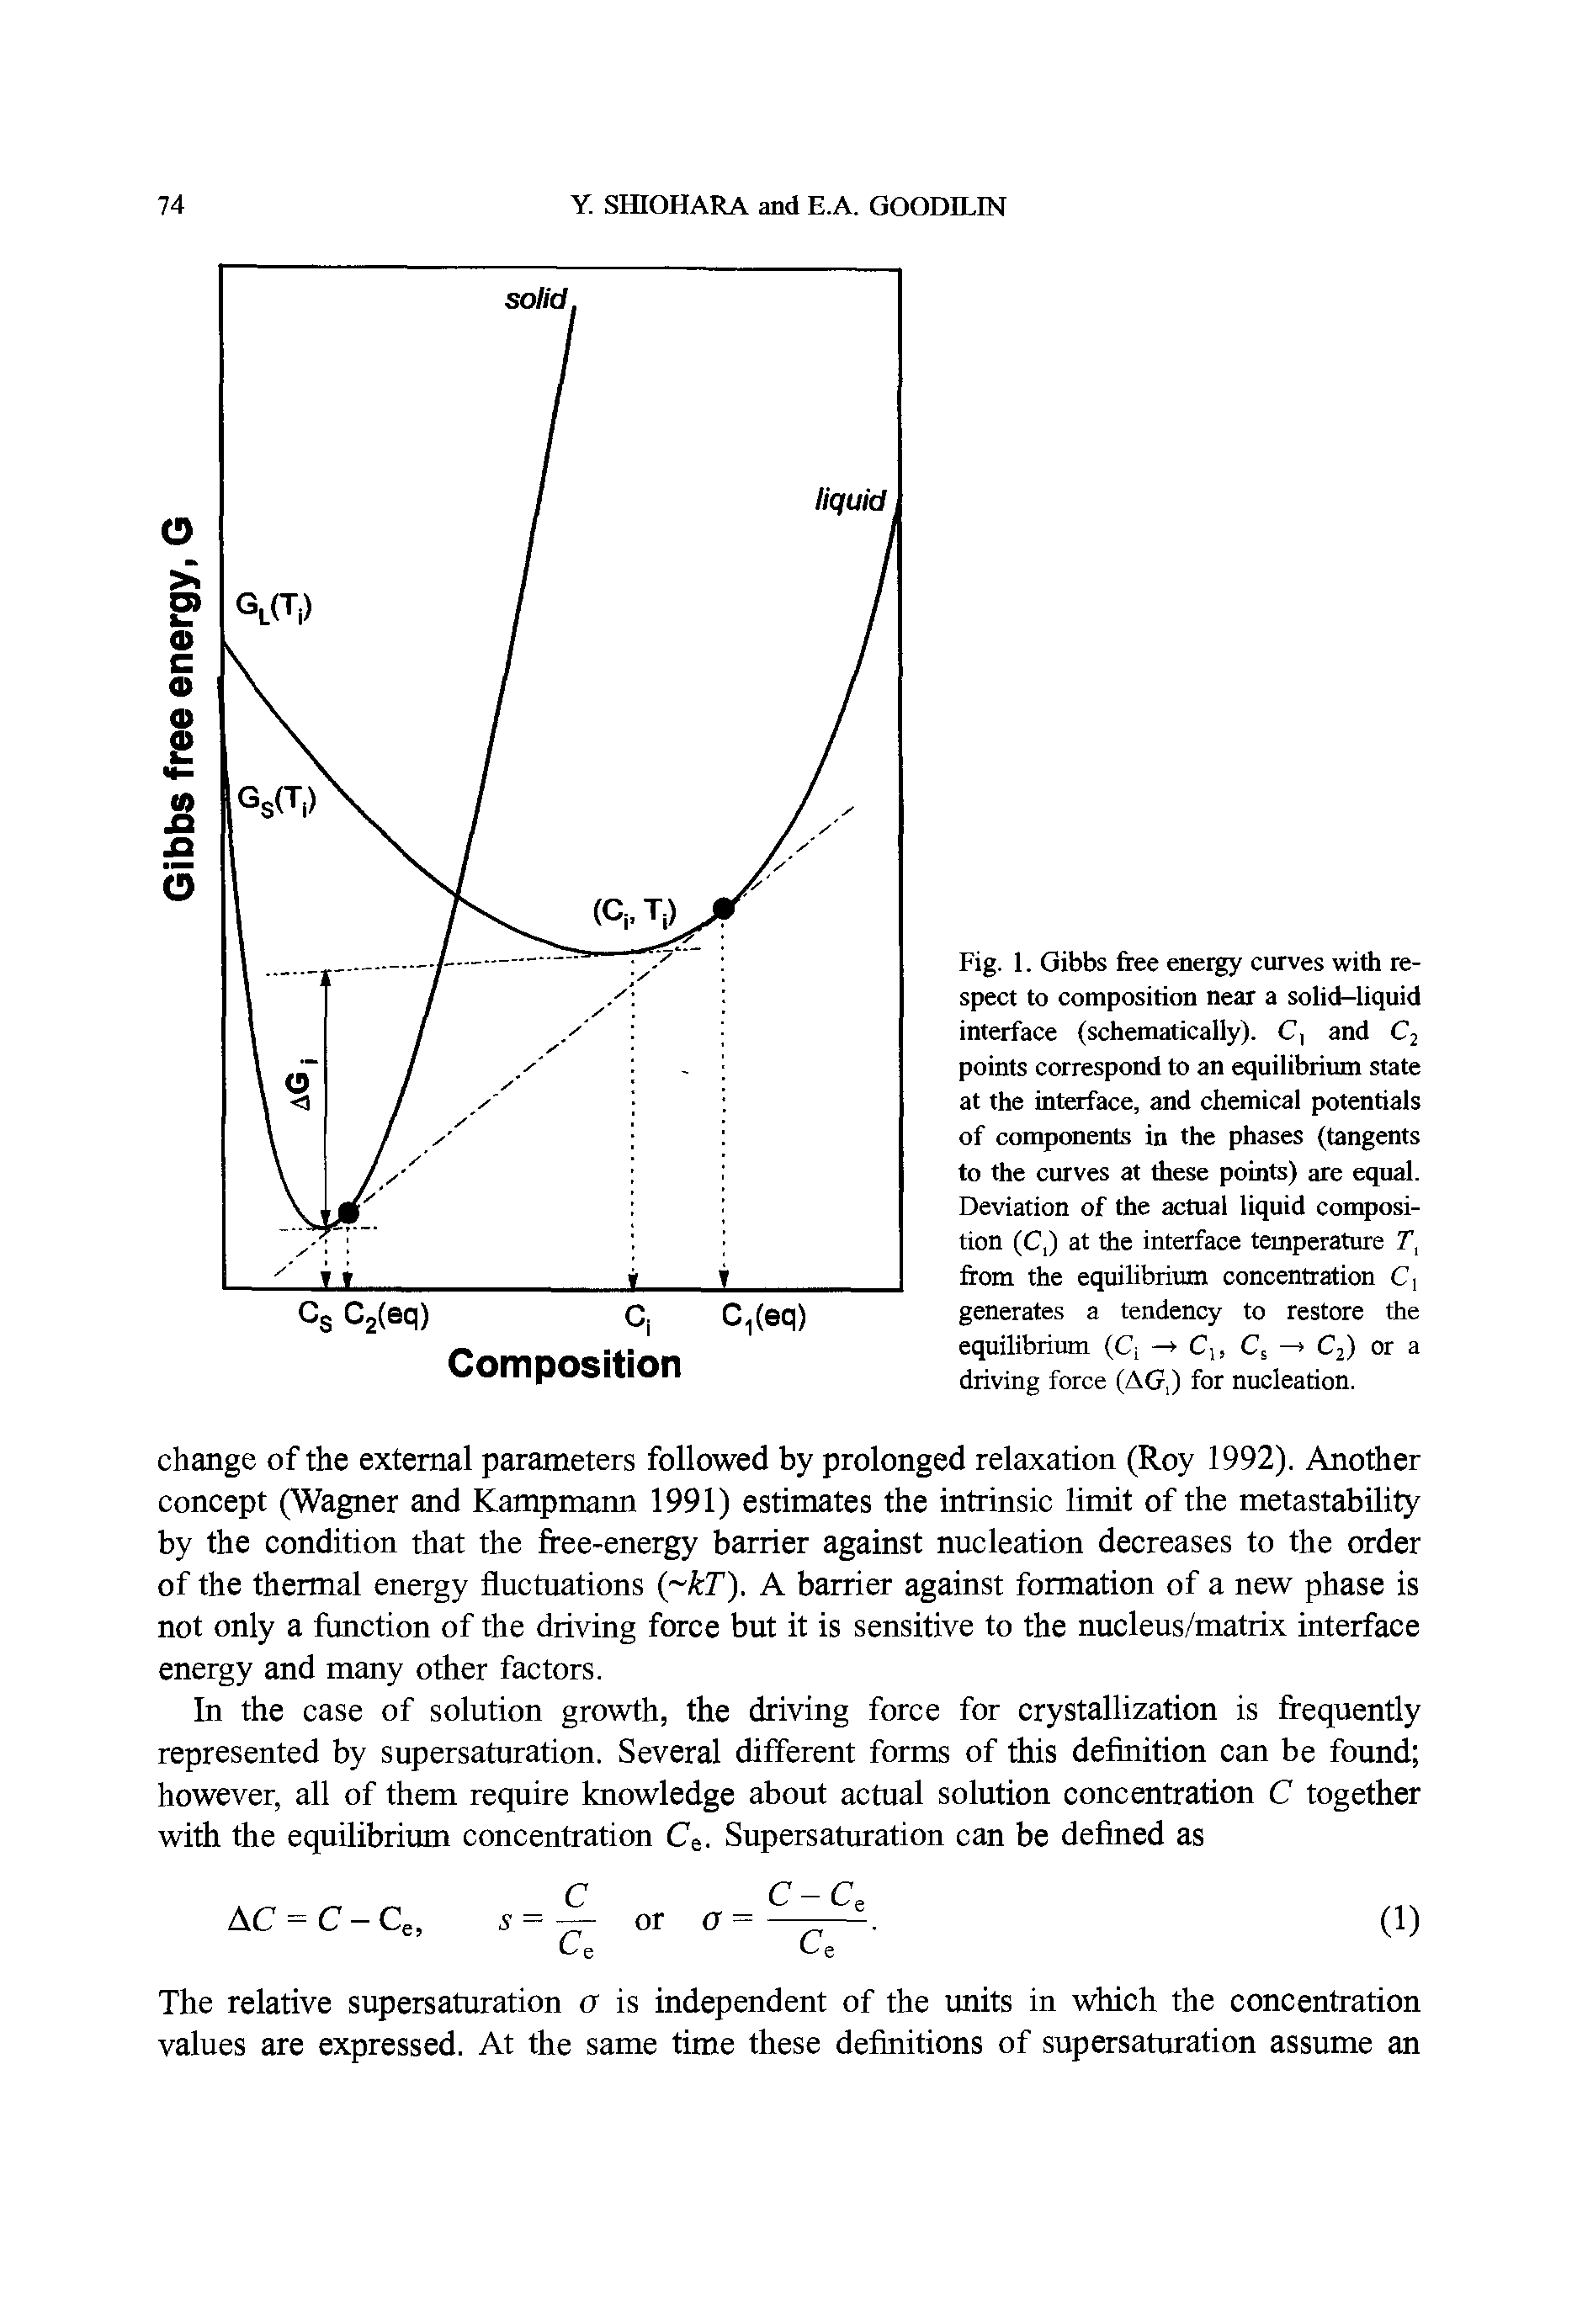 Fig. 1. Gibbs free energy curves with respect to composition near a solid—liquid interface (schematically). C, and Cj points correspond to an equilibrium state at the interface, and chemical potentials of components in the phases (tangents to the curves at these points) are equal. Deviation of the actual liquid composition (C,) at the interface temperature T, ftom the equilibrium concentration C, generates a tendency to restore the equilibrium (C — Ci, C2) or a driving force (AG,) for nucleation.